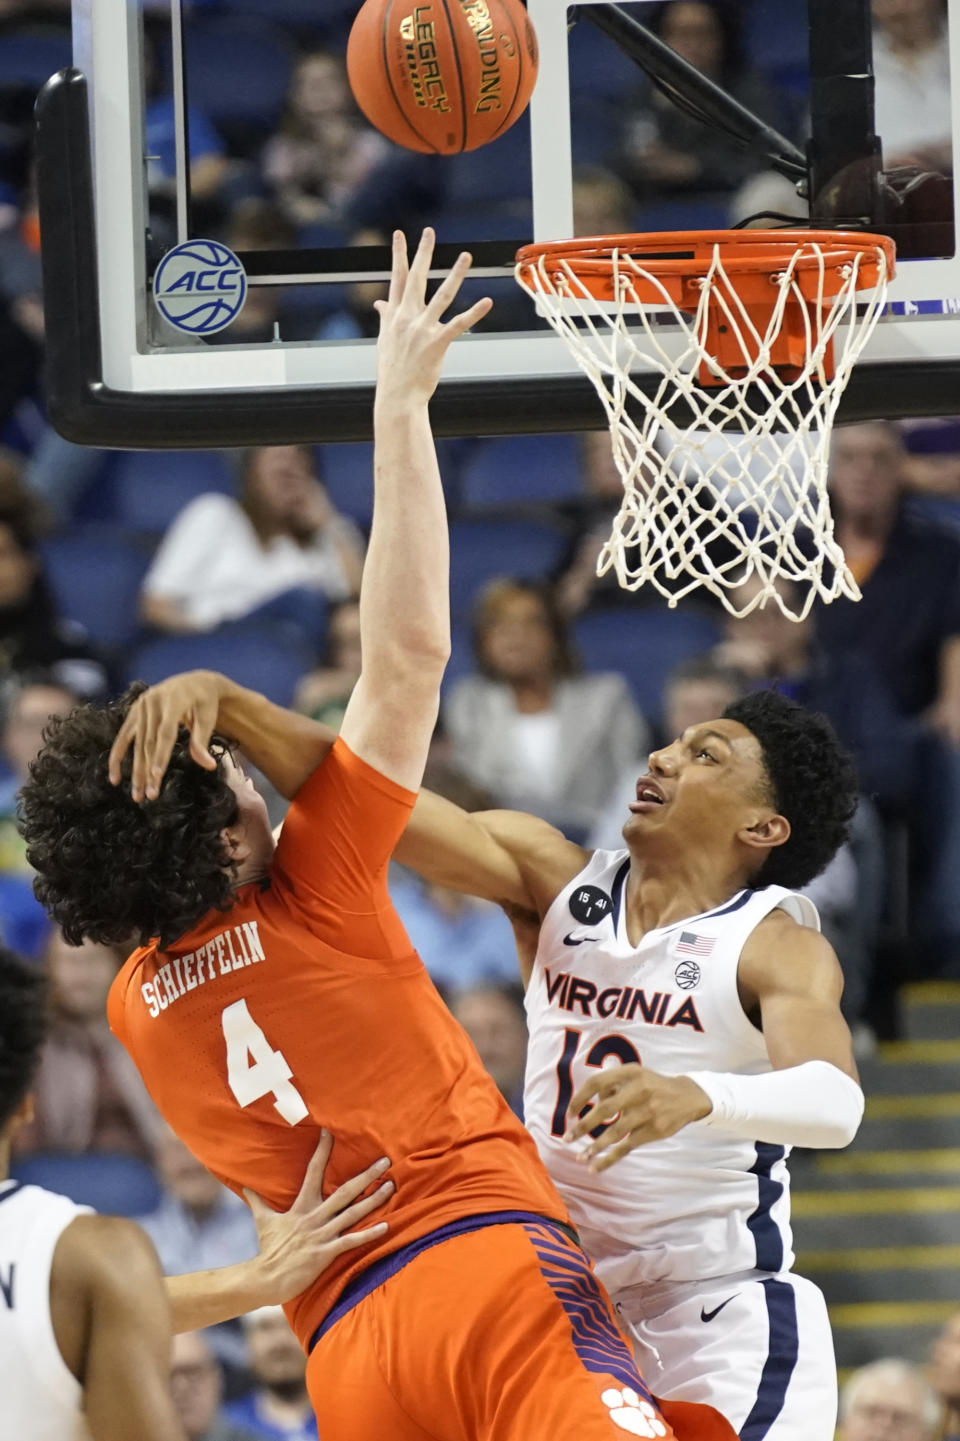 Clemson forward Ian Schieffelin (4) is hit as he shoots against Virginia guard Chase Coleman (12) during the first half of an NCAA college basketball game at the Atlantic Coast Conference Tournament in Greensboro, N.C., Friday, March 10, 2023. (AP Photo/Chuck Burton)